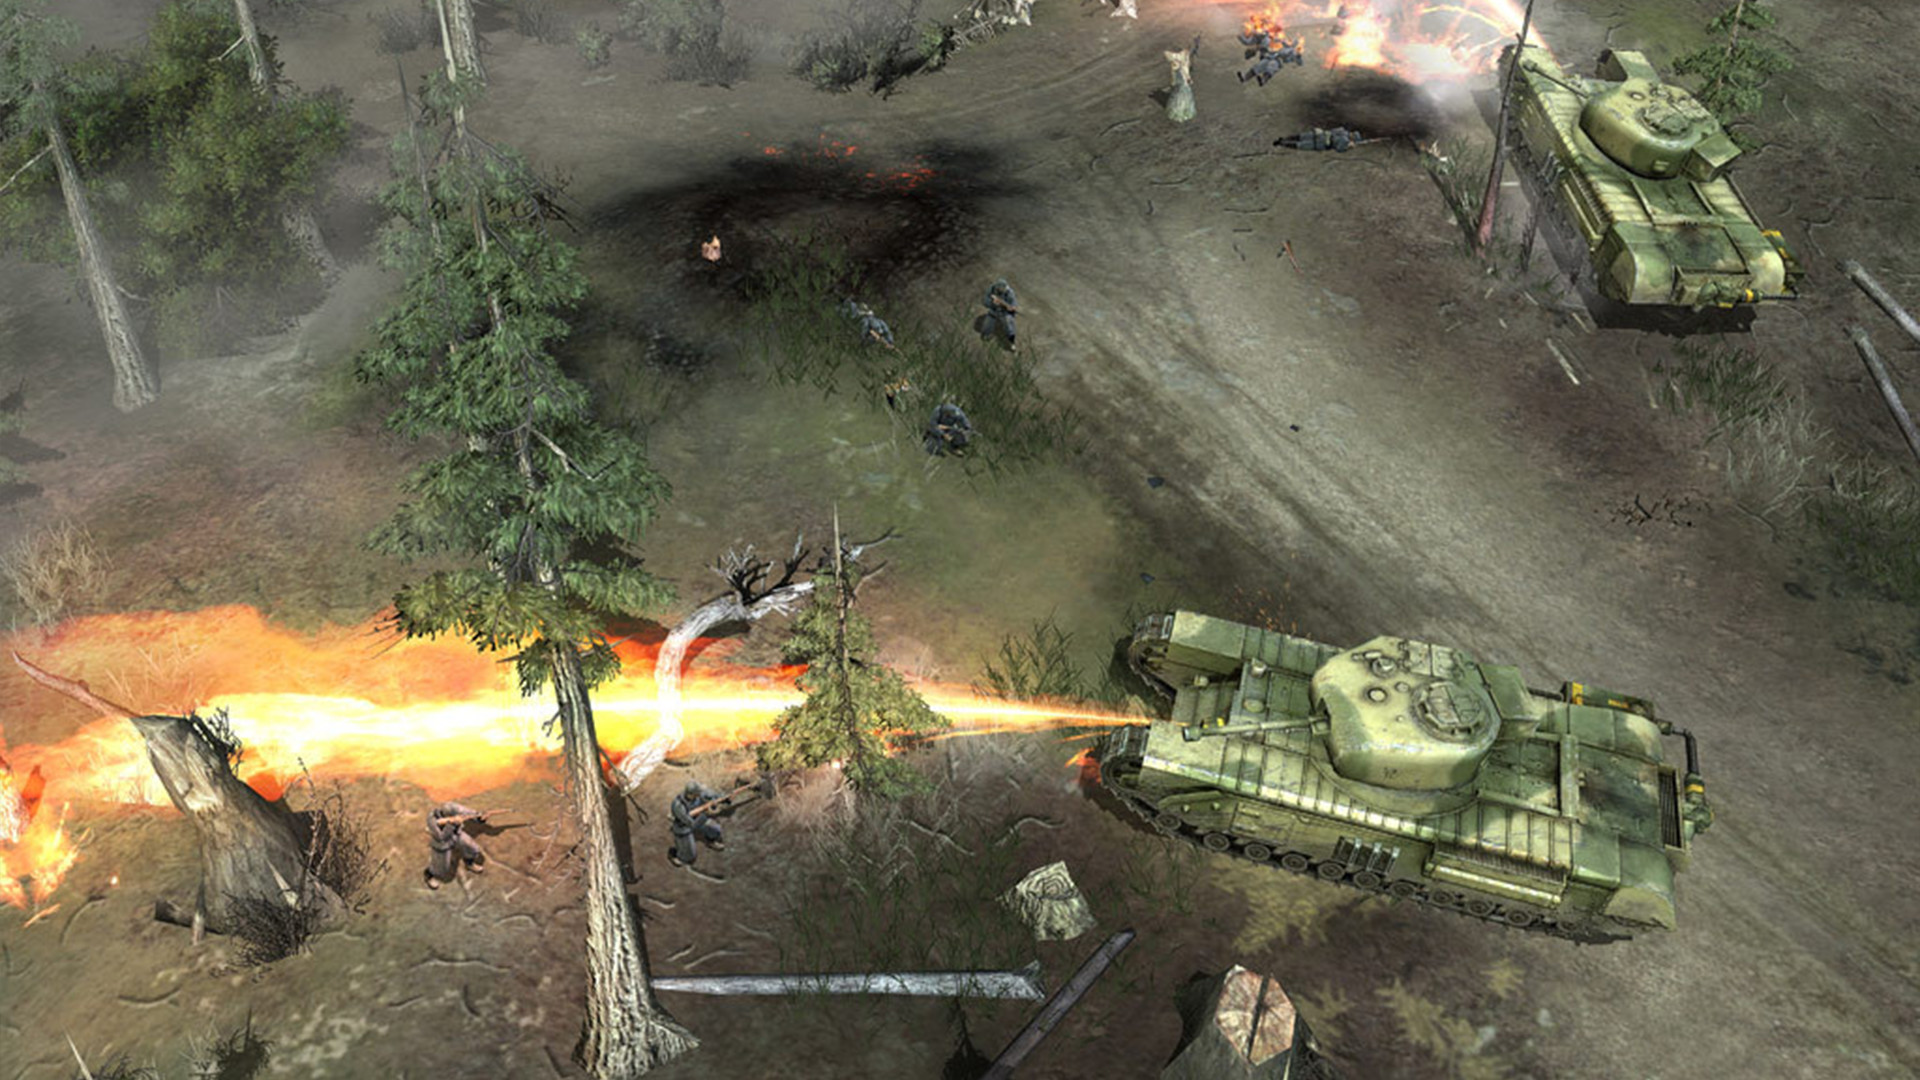 Company of heroes opposing fronts download